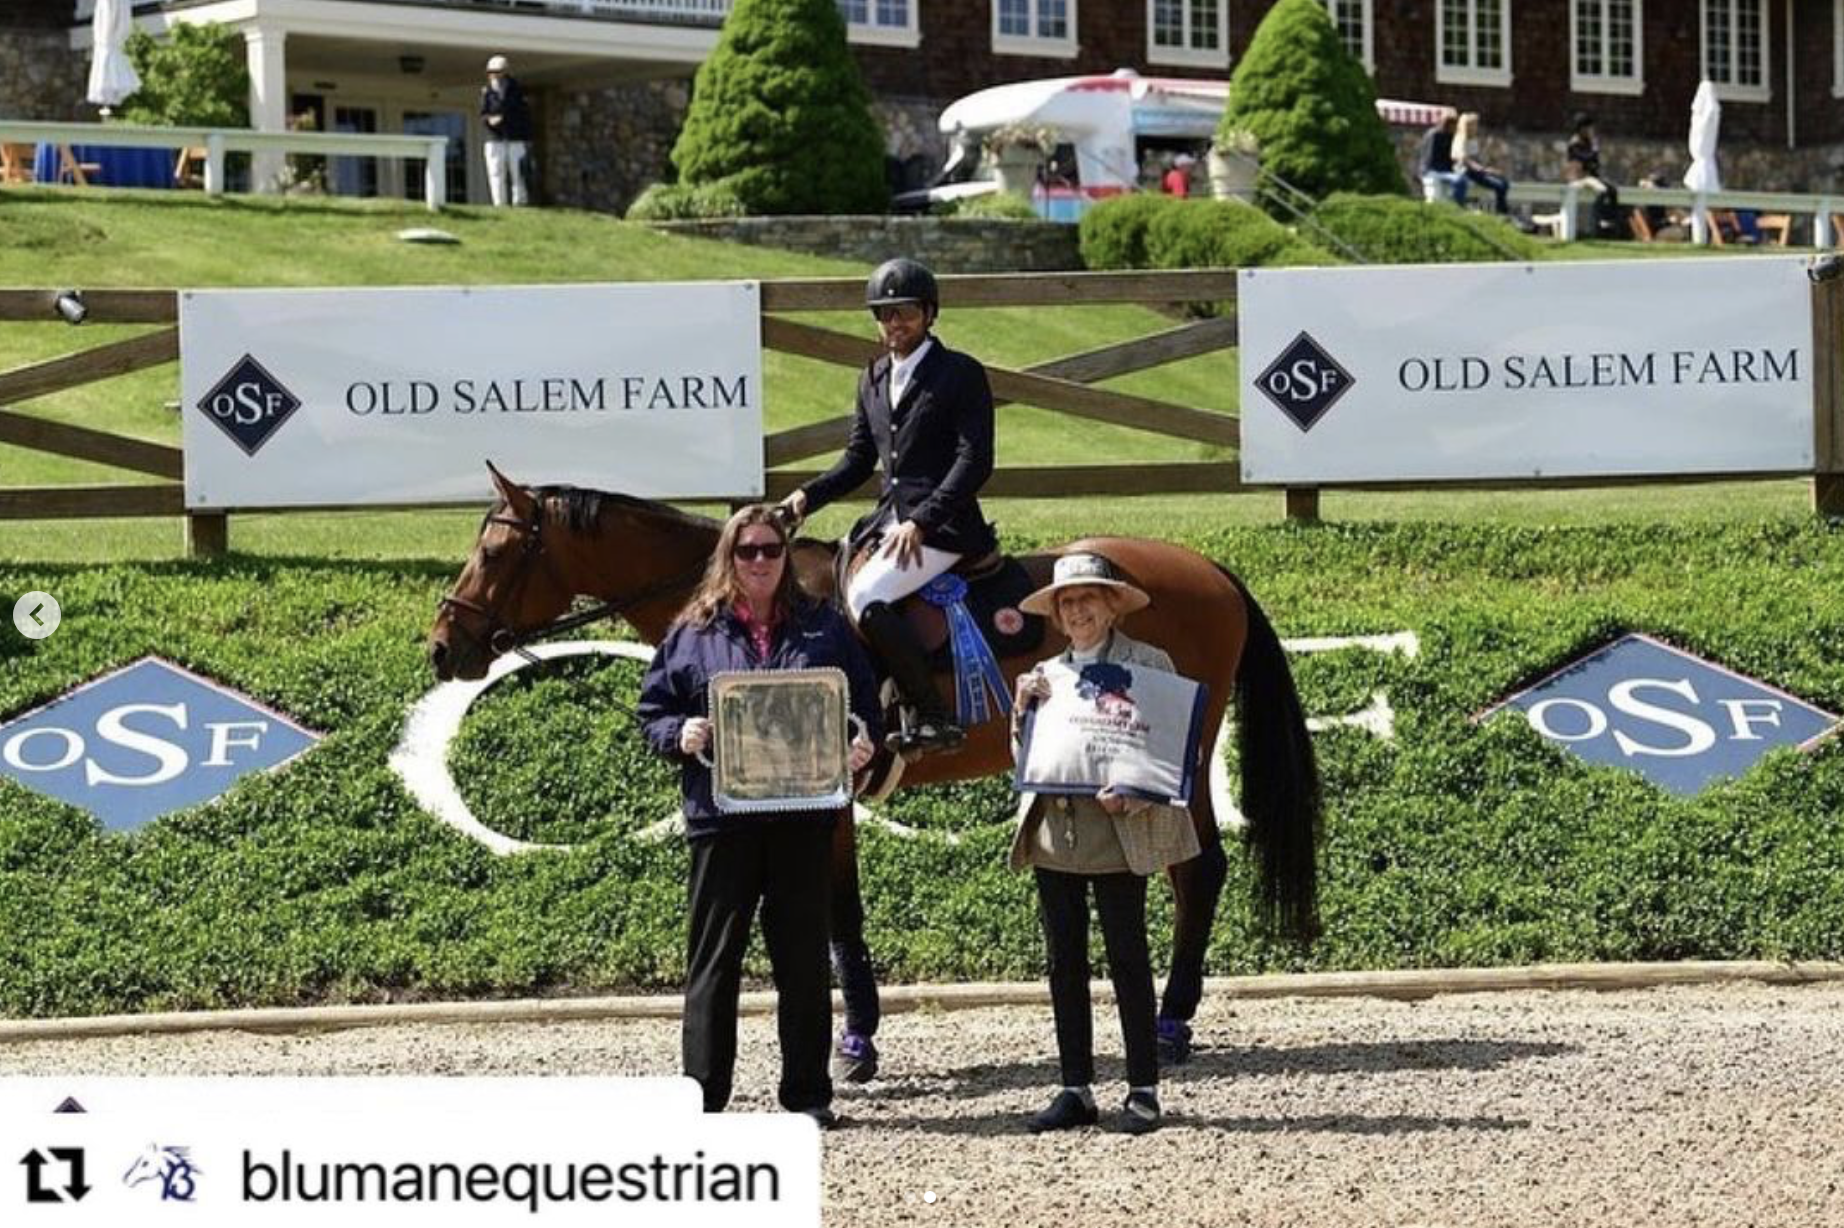 Cachemire de Braize with another victory in the $38,700 CSI4* 1.45m @NorthSalem!